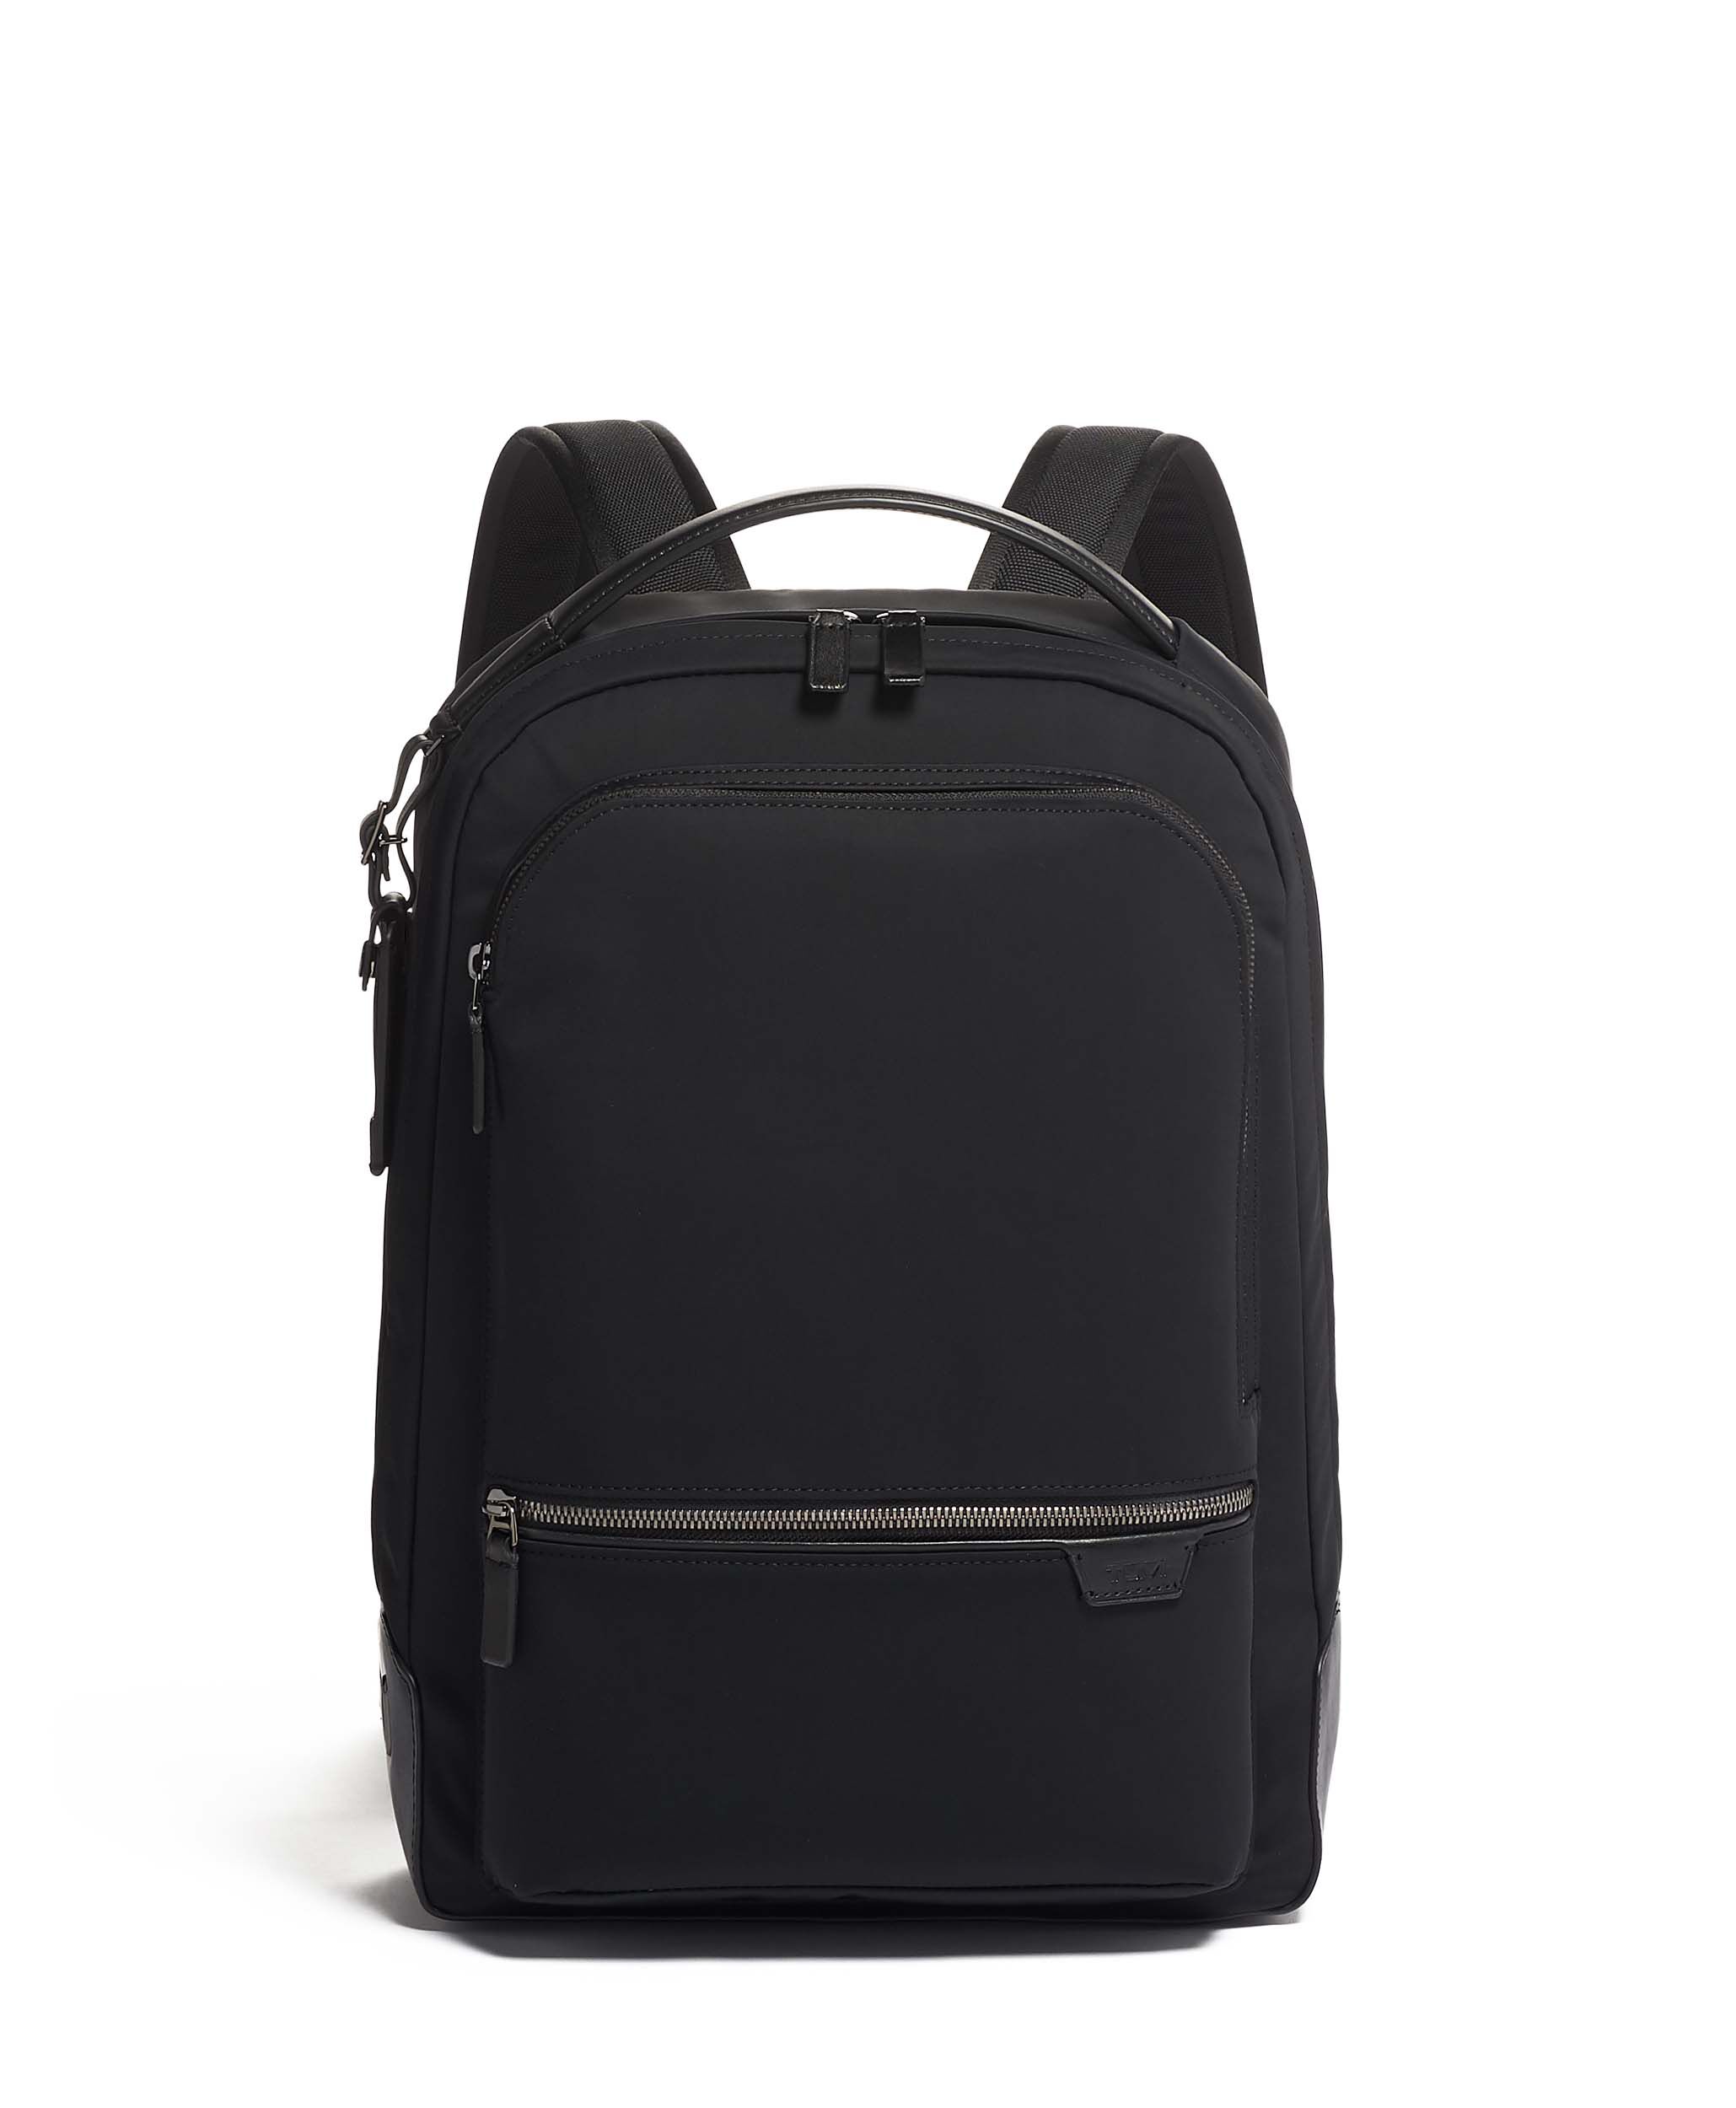 Harrison Collection | Briefcases, Backpacks & Messenger Bags | TUMI